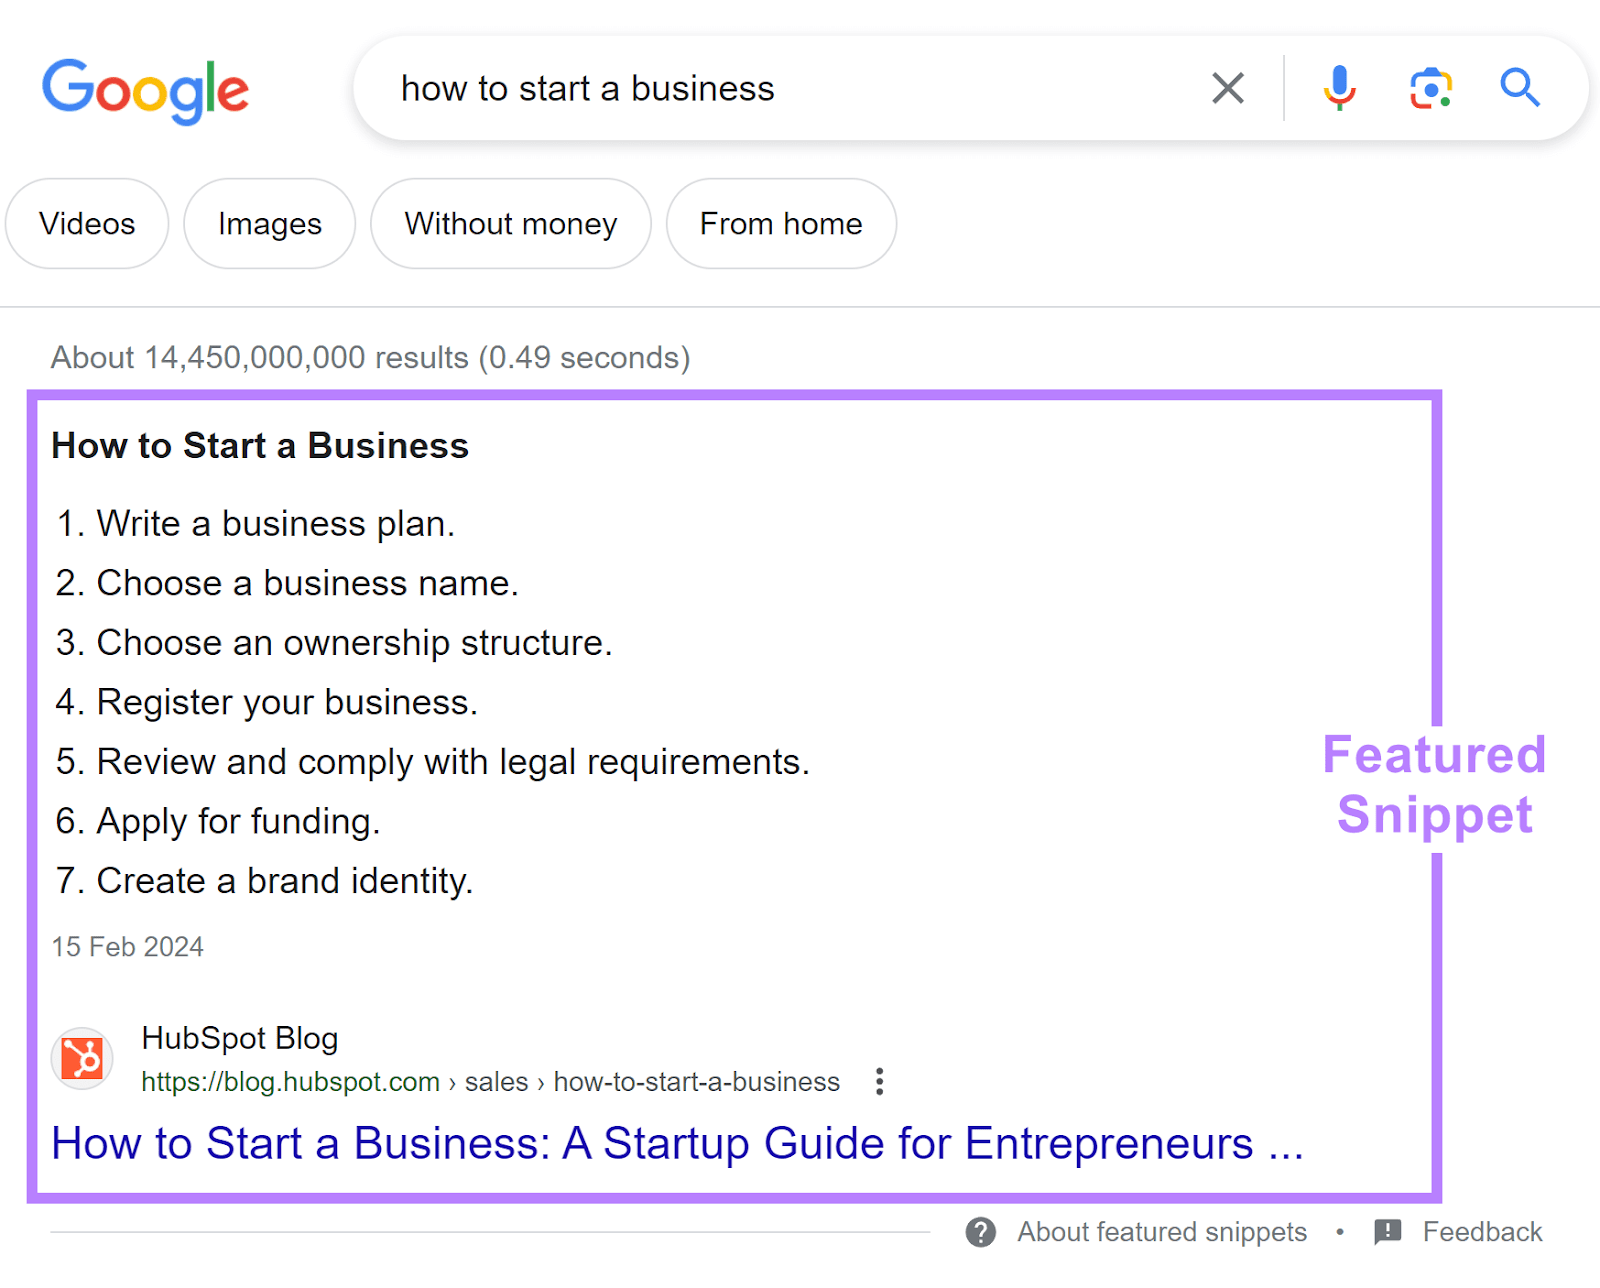 A featured snippet connected  Google SERP for "how to commencement  a business" query